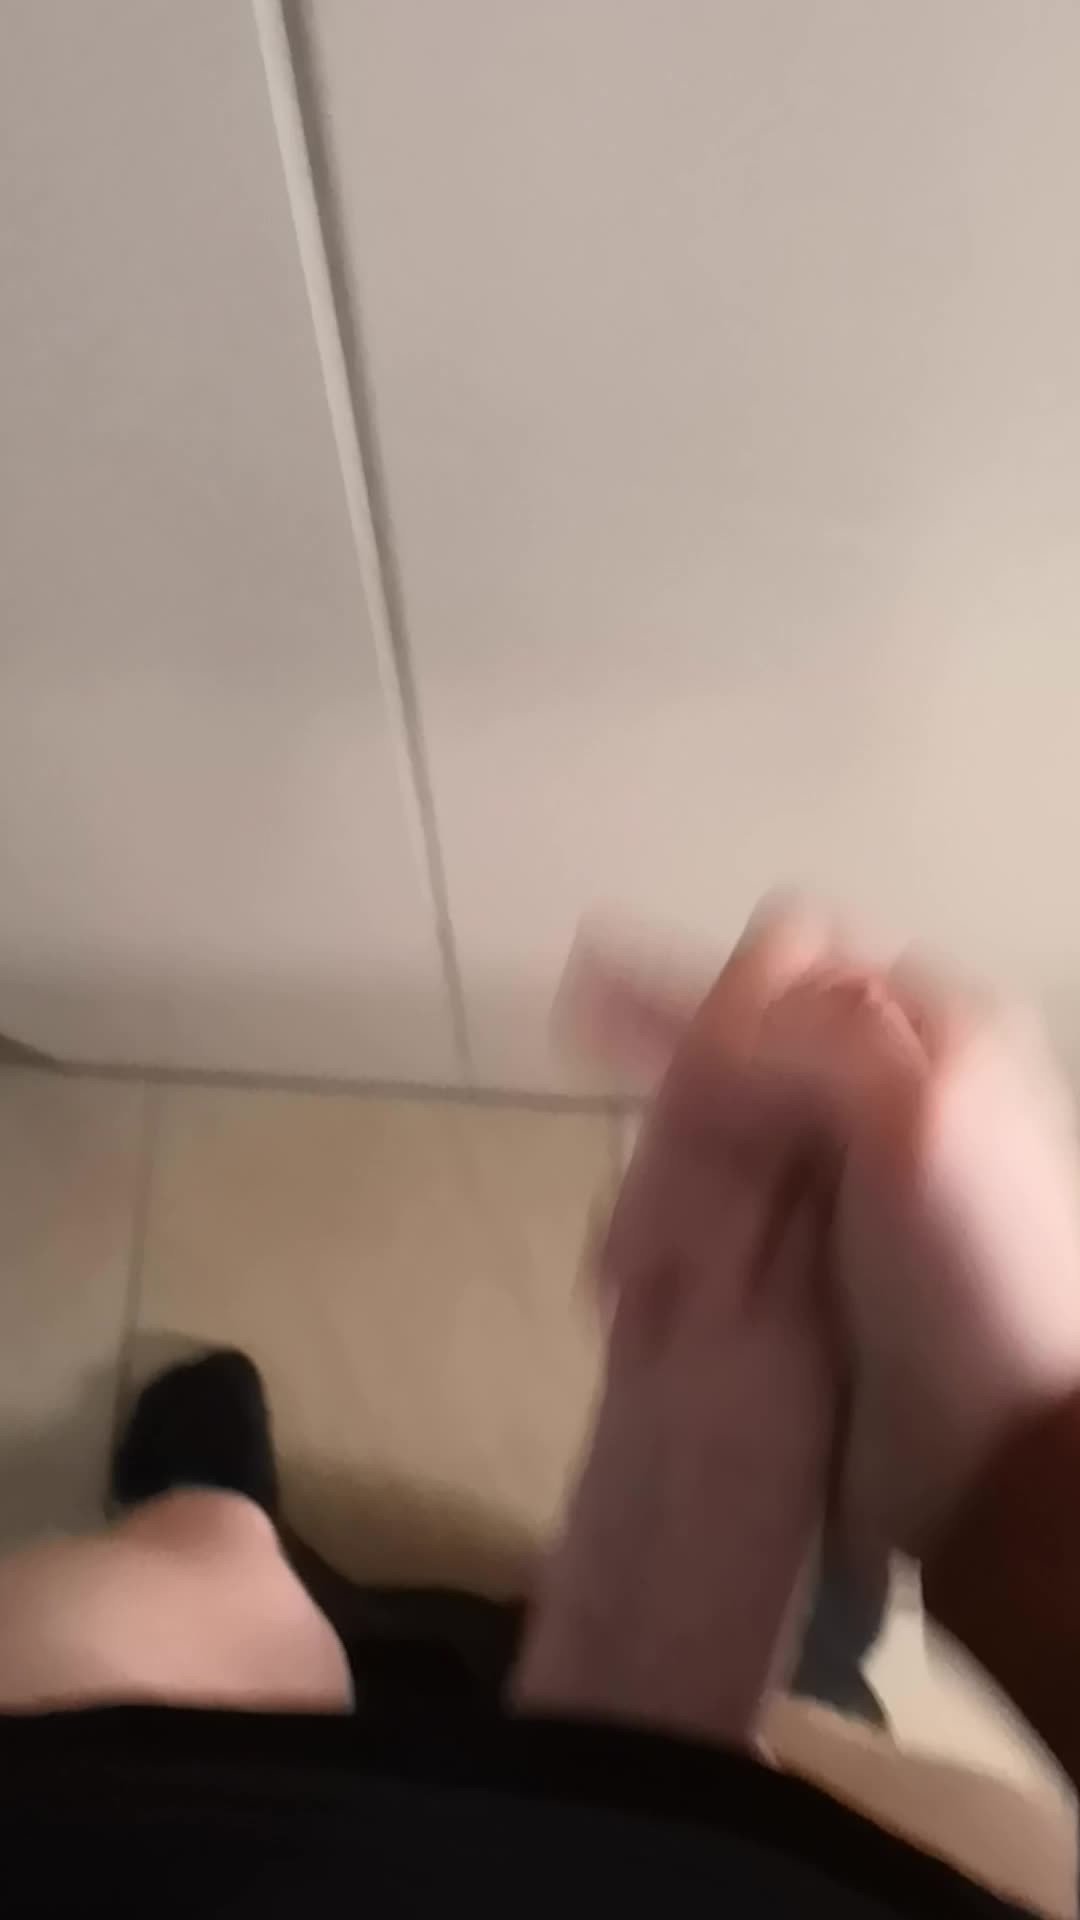 Video by florian61981550 with the username @florian61981550,  June 6, 2021 at 8:48 PM. The post is about the topic Cumshot and the text says 'VID_20210325_141600'